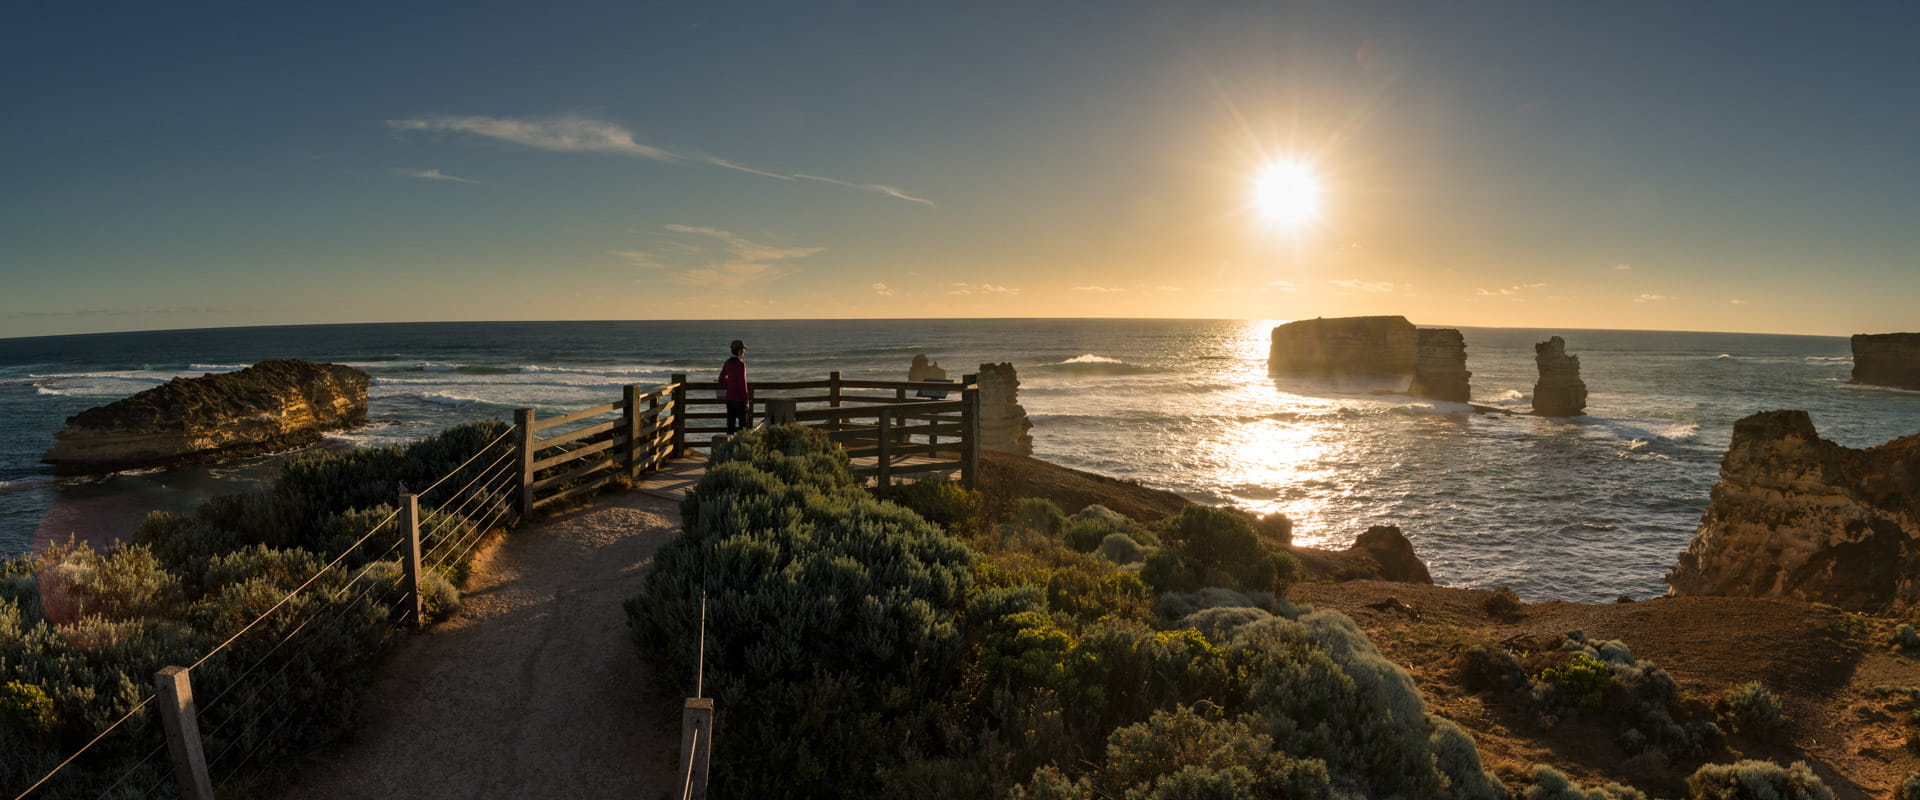 A person stands on a a viewing platform, looking out over the ocean and rock stacks. The sun sets in the background. 